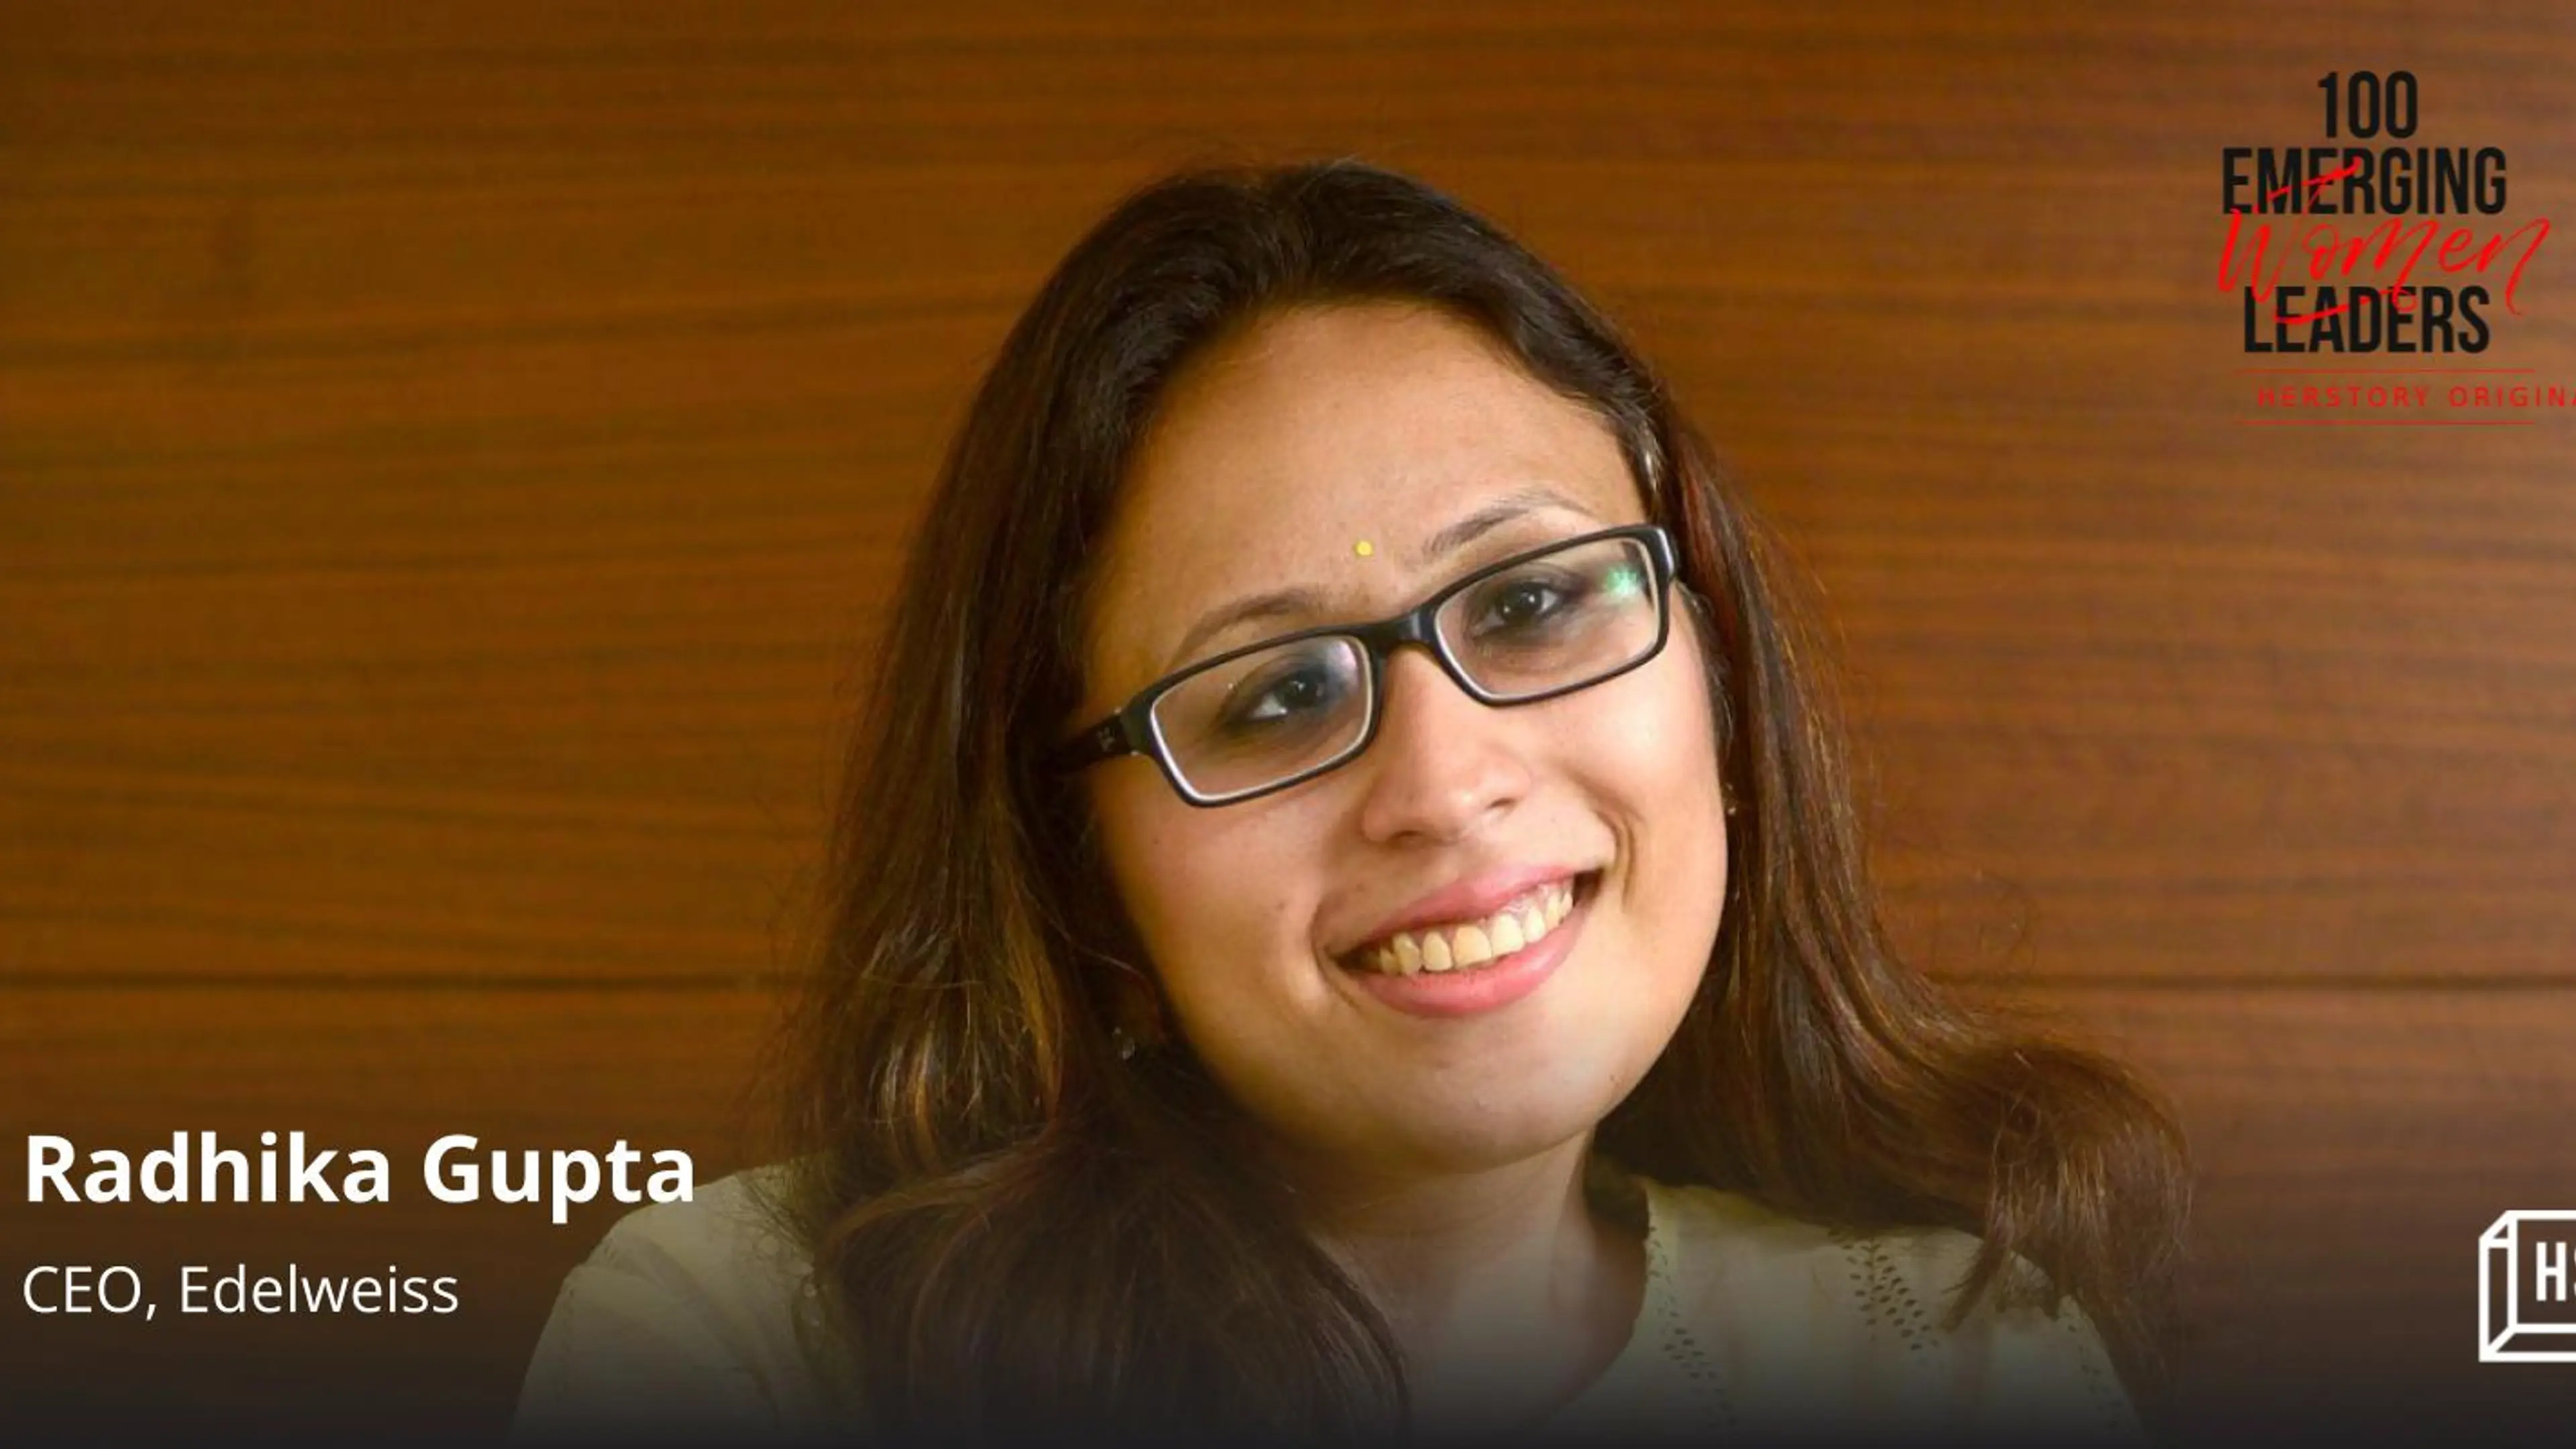 [100 Emerging Women Leaders] Meet Edelweiss’ Radhika Gupta, who believes failure is not the end of the world